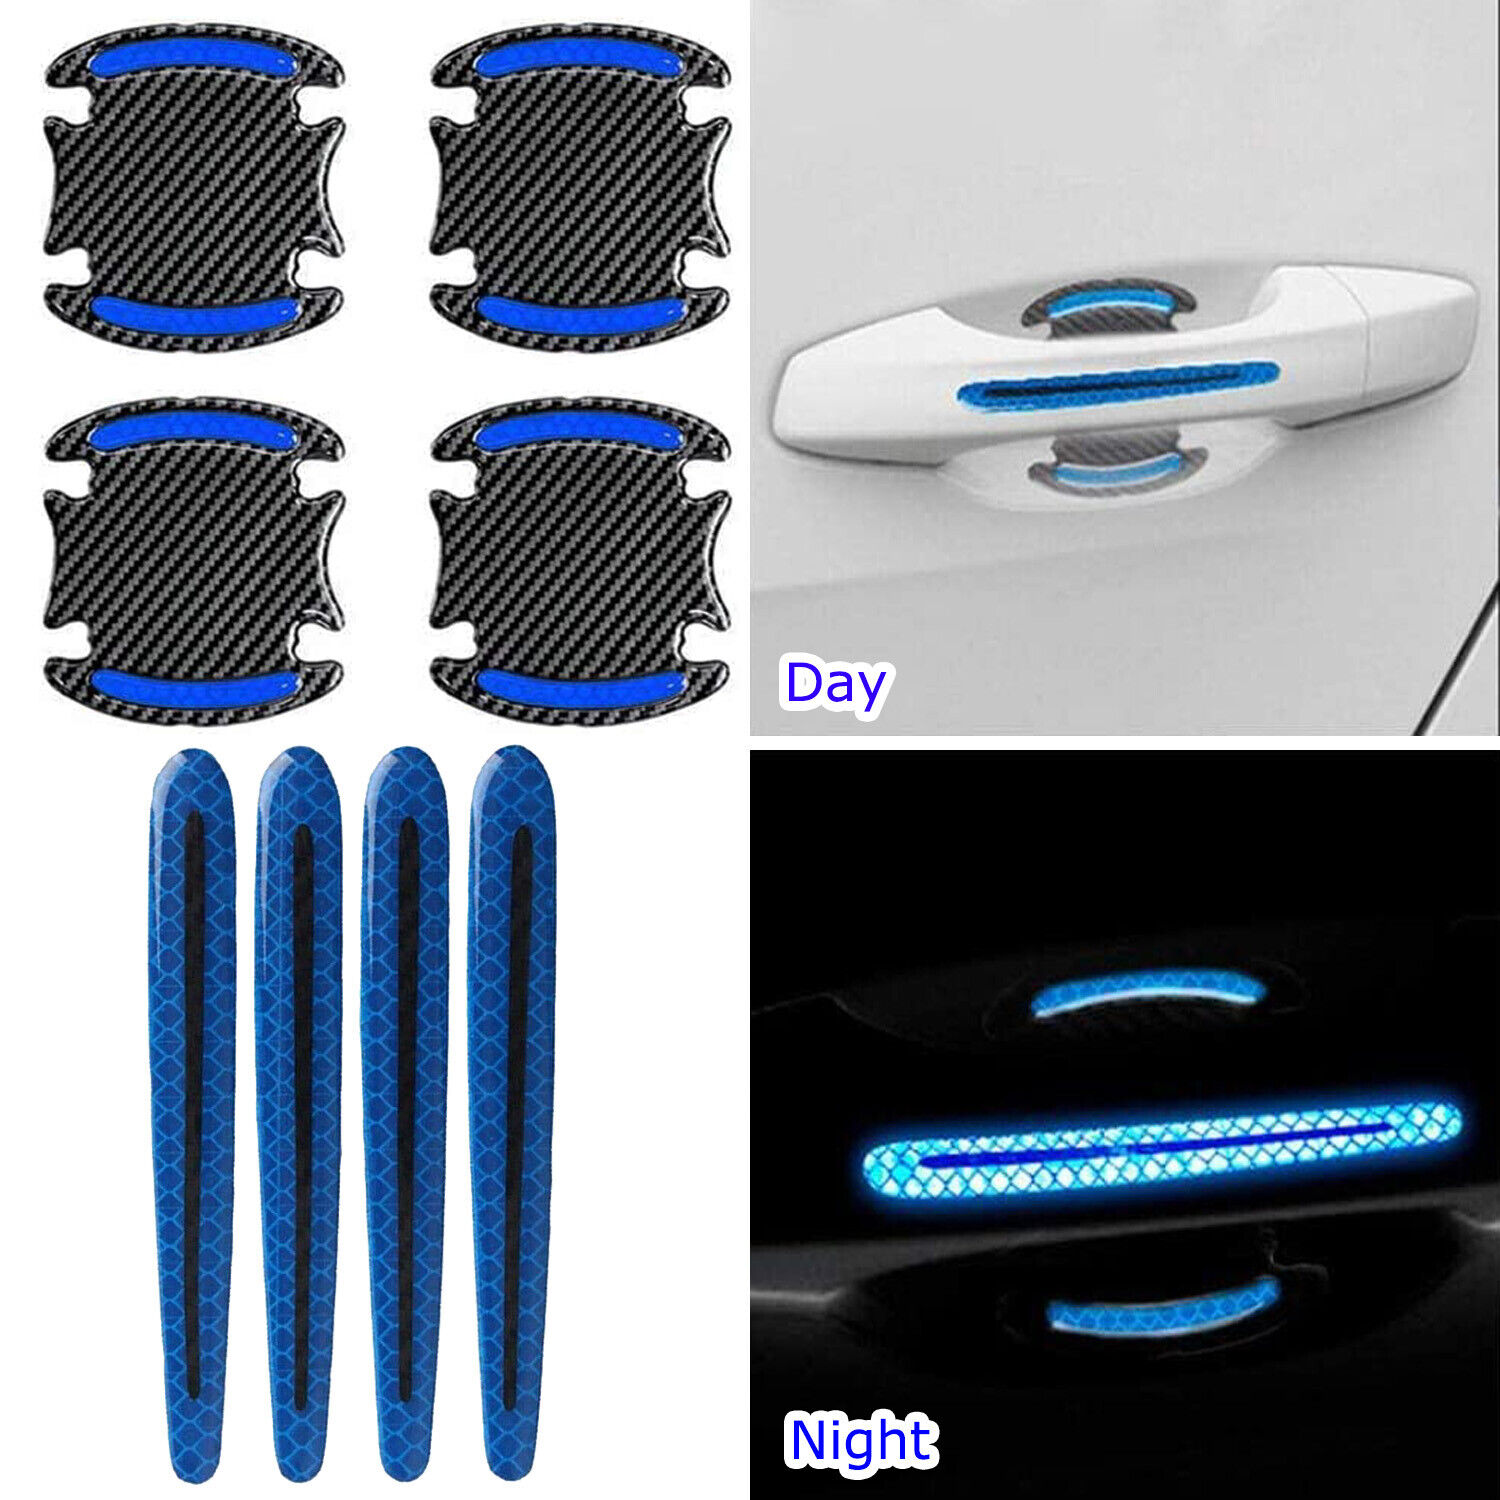 8x Reflective Car Door Handle Safety Strip Protective Film Sticker Warning Decal